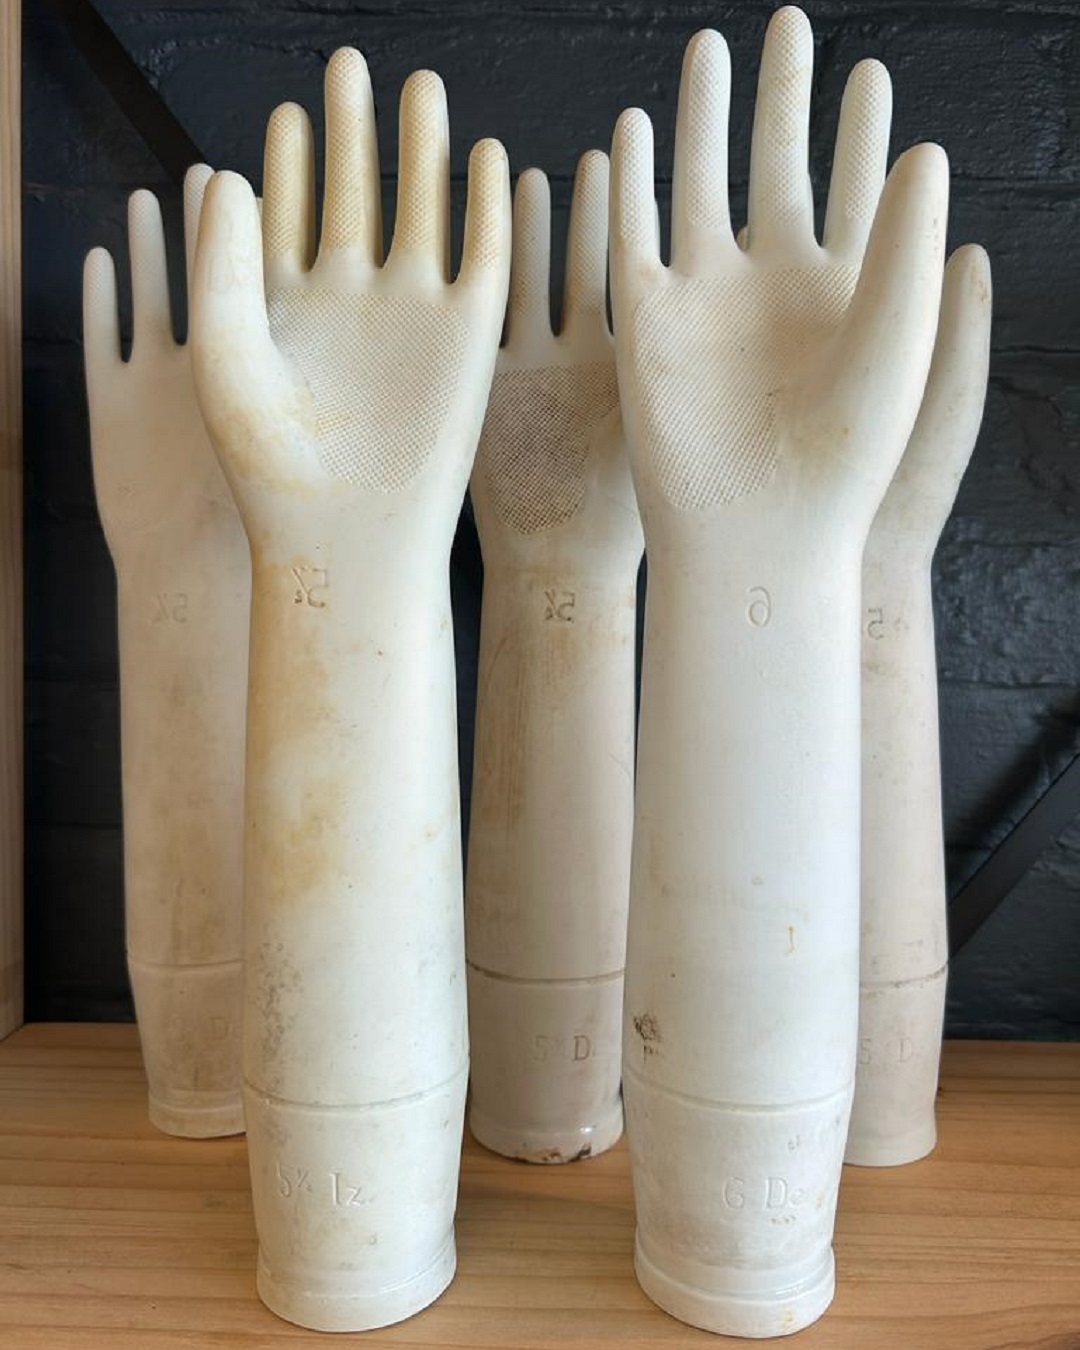 White porcelain glove moulds on a table